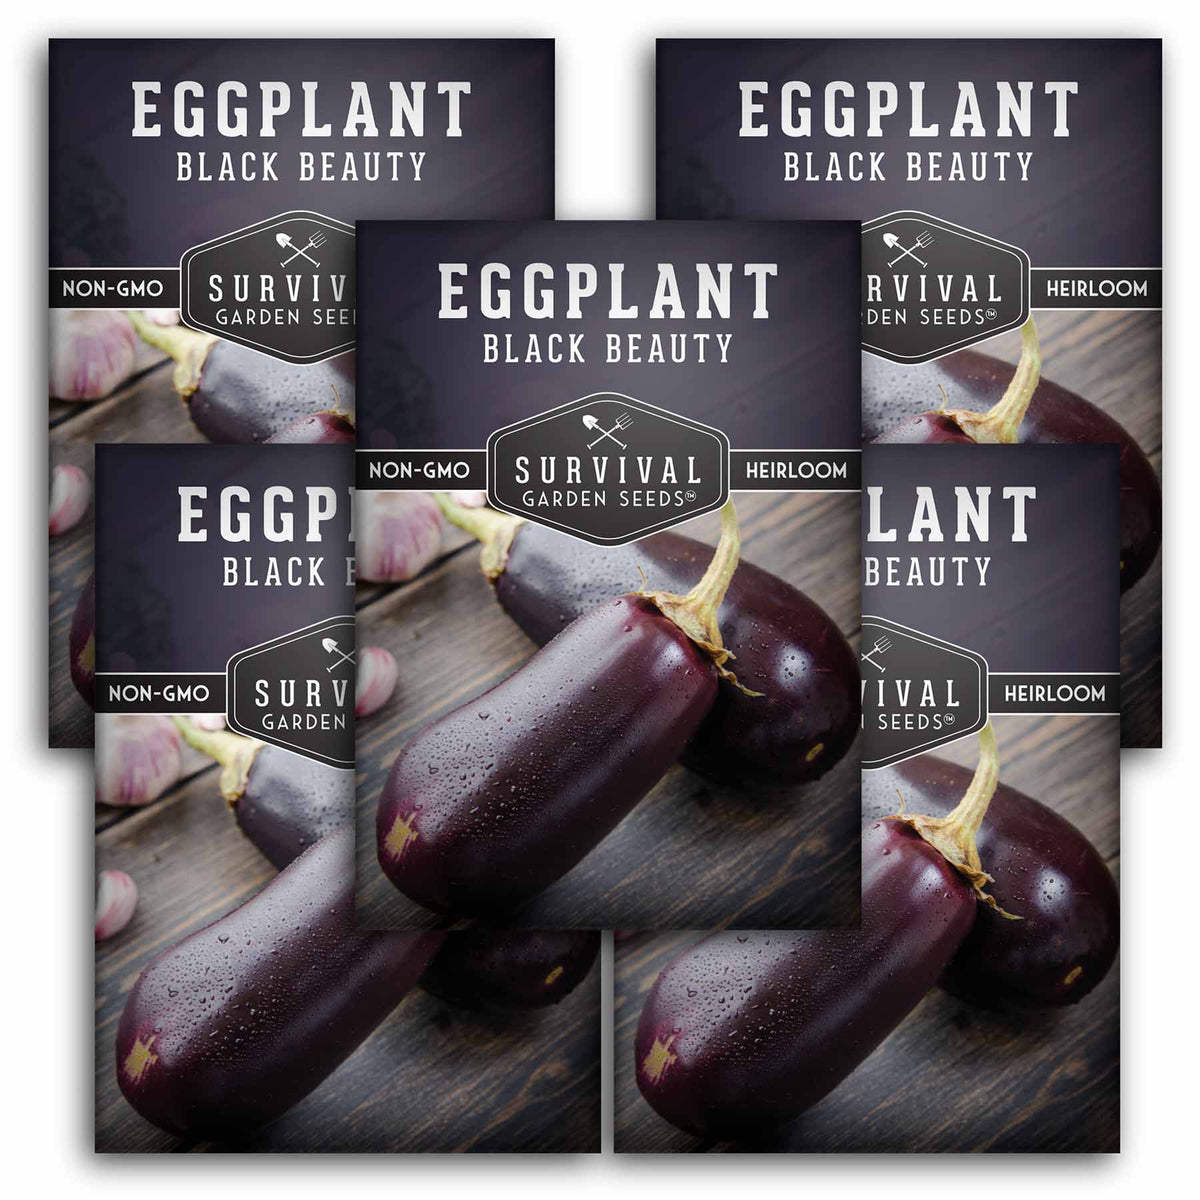 5 packets of Black Beauty Eggplant seeds